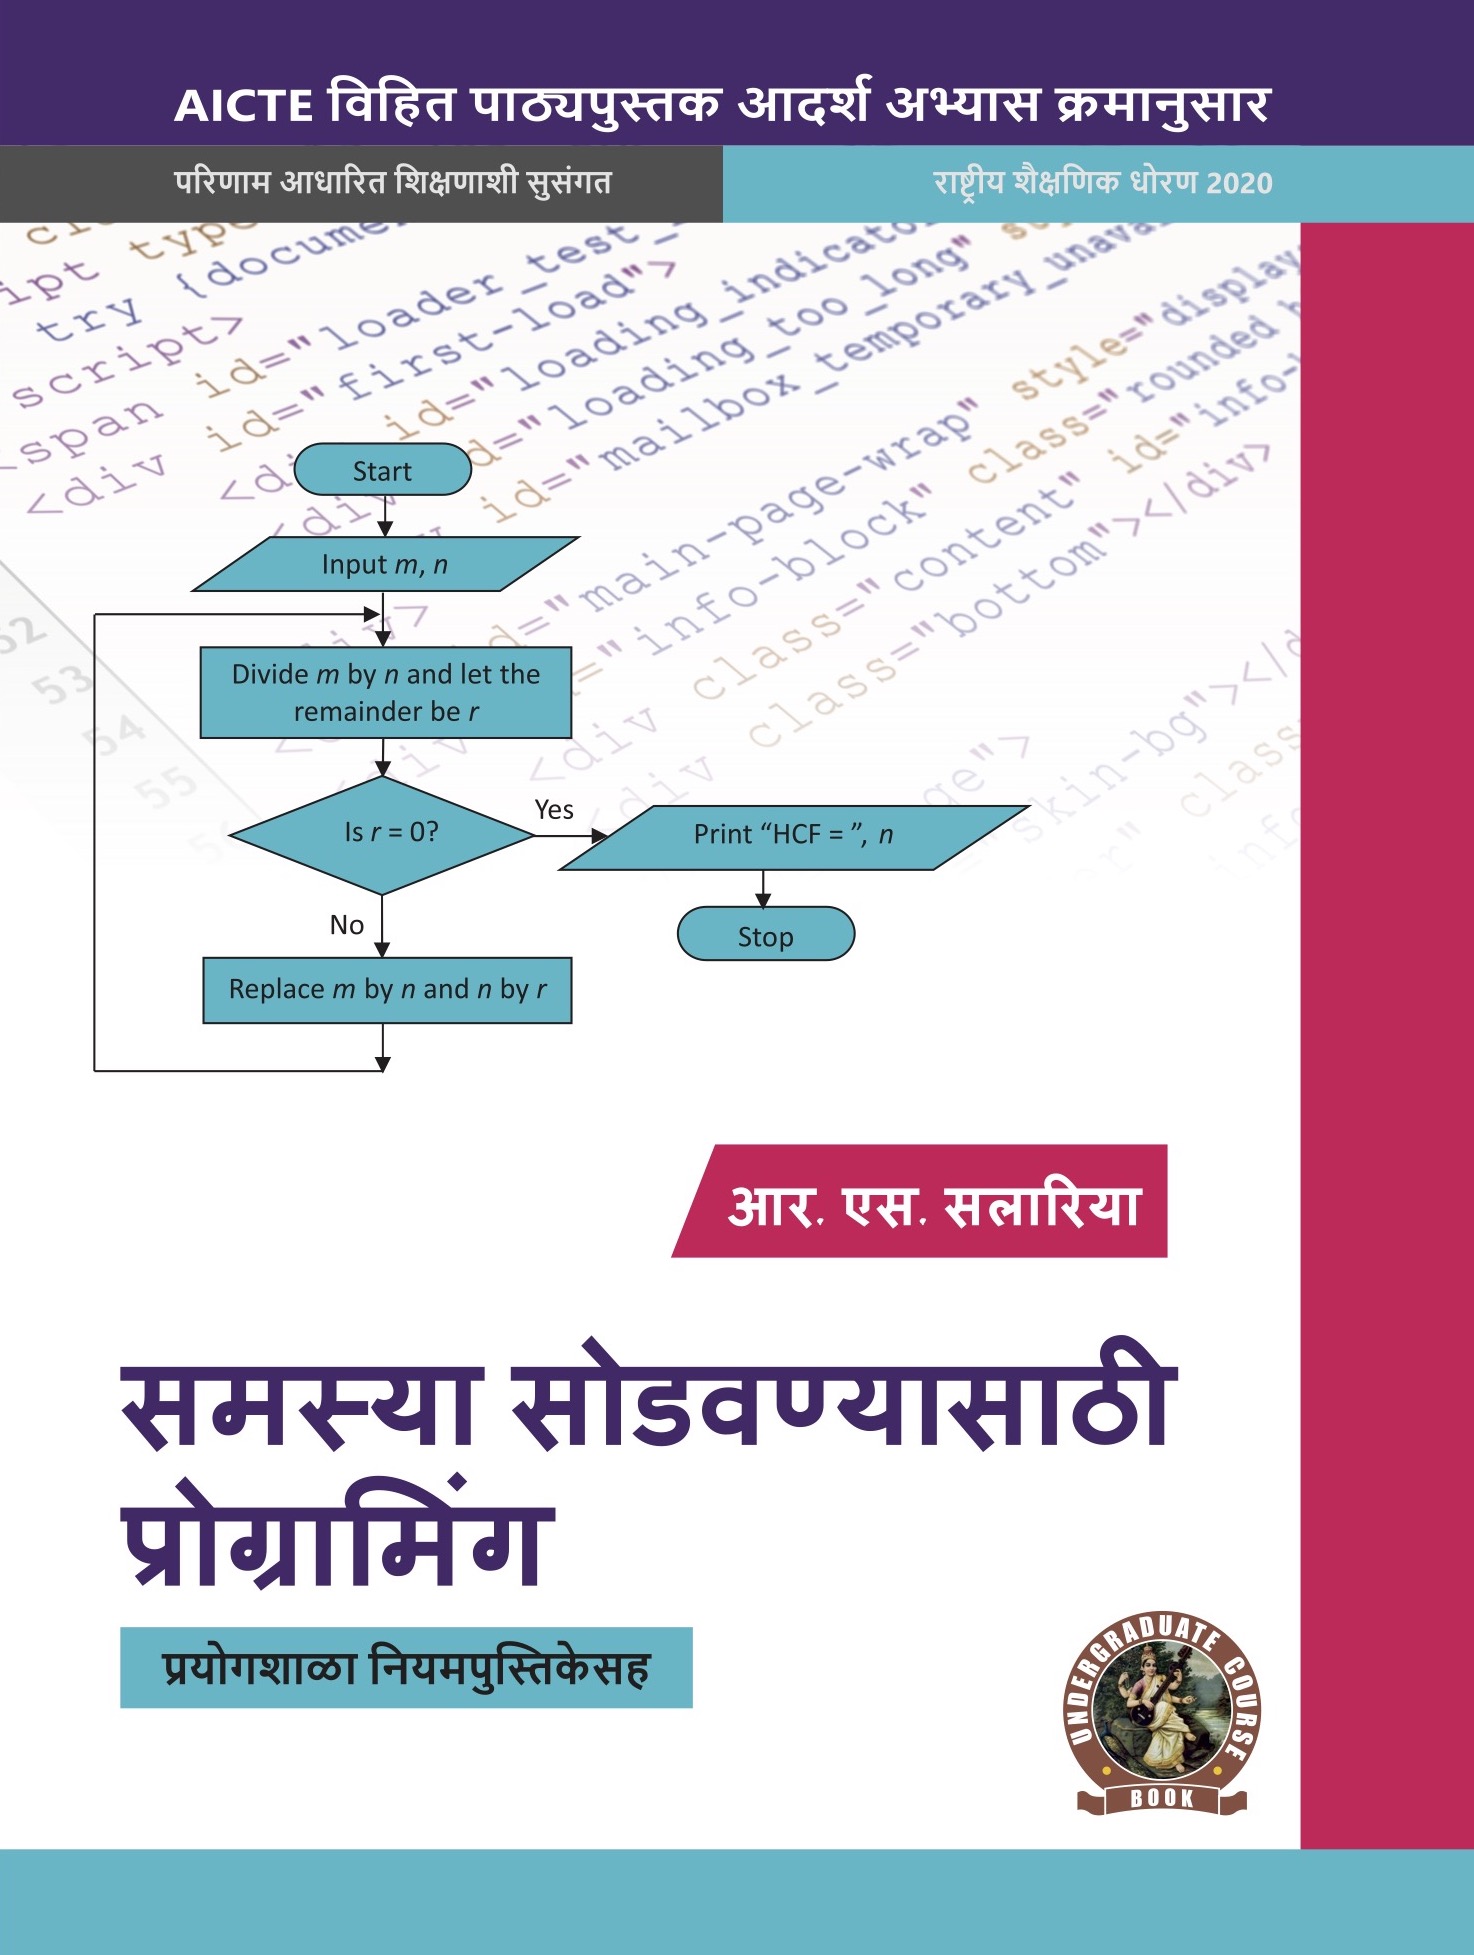 Programming for Problem Solving (with Lab Manual) (Marathi)